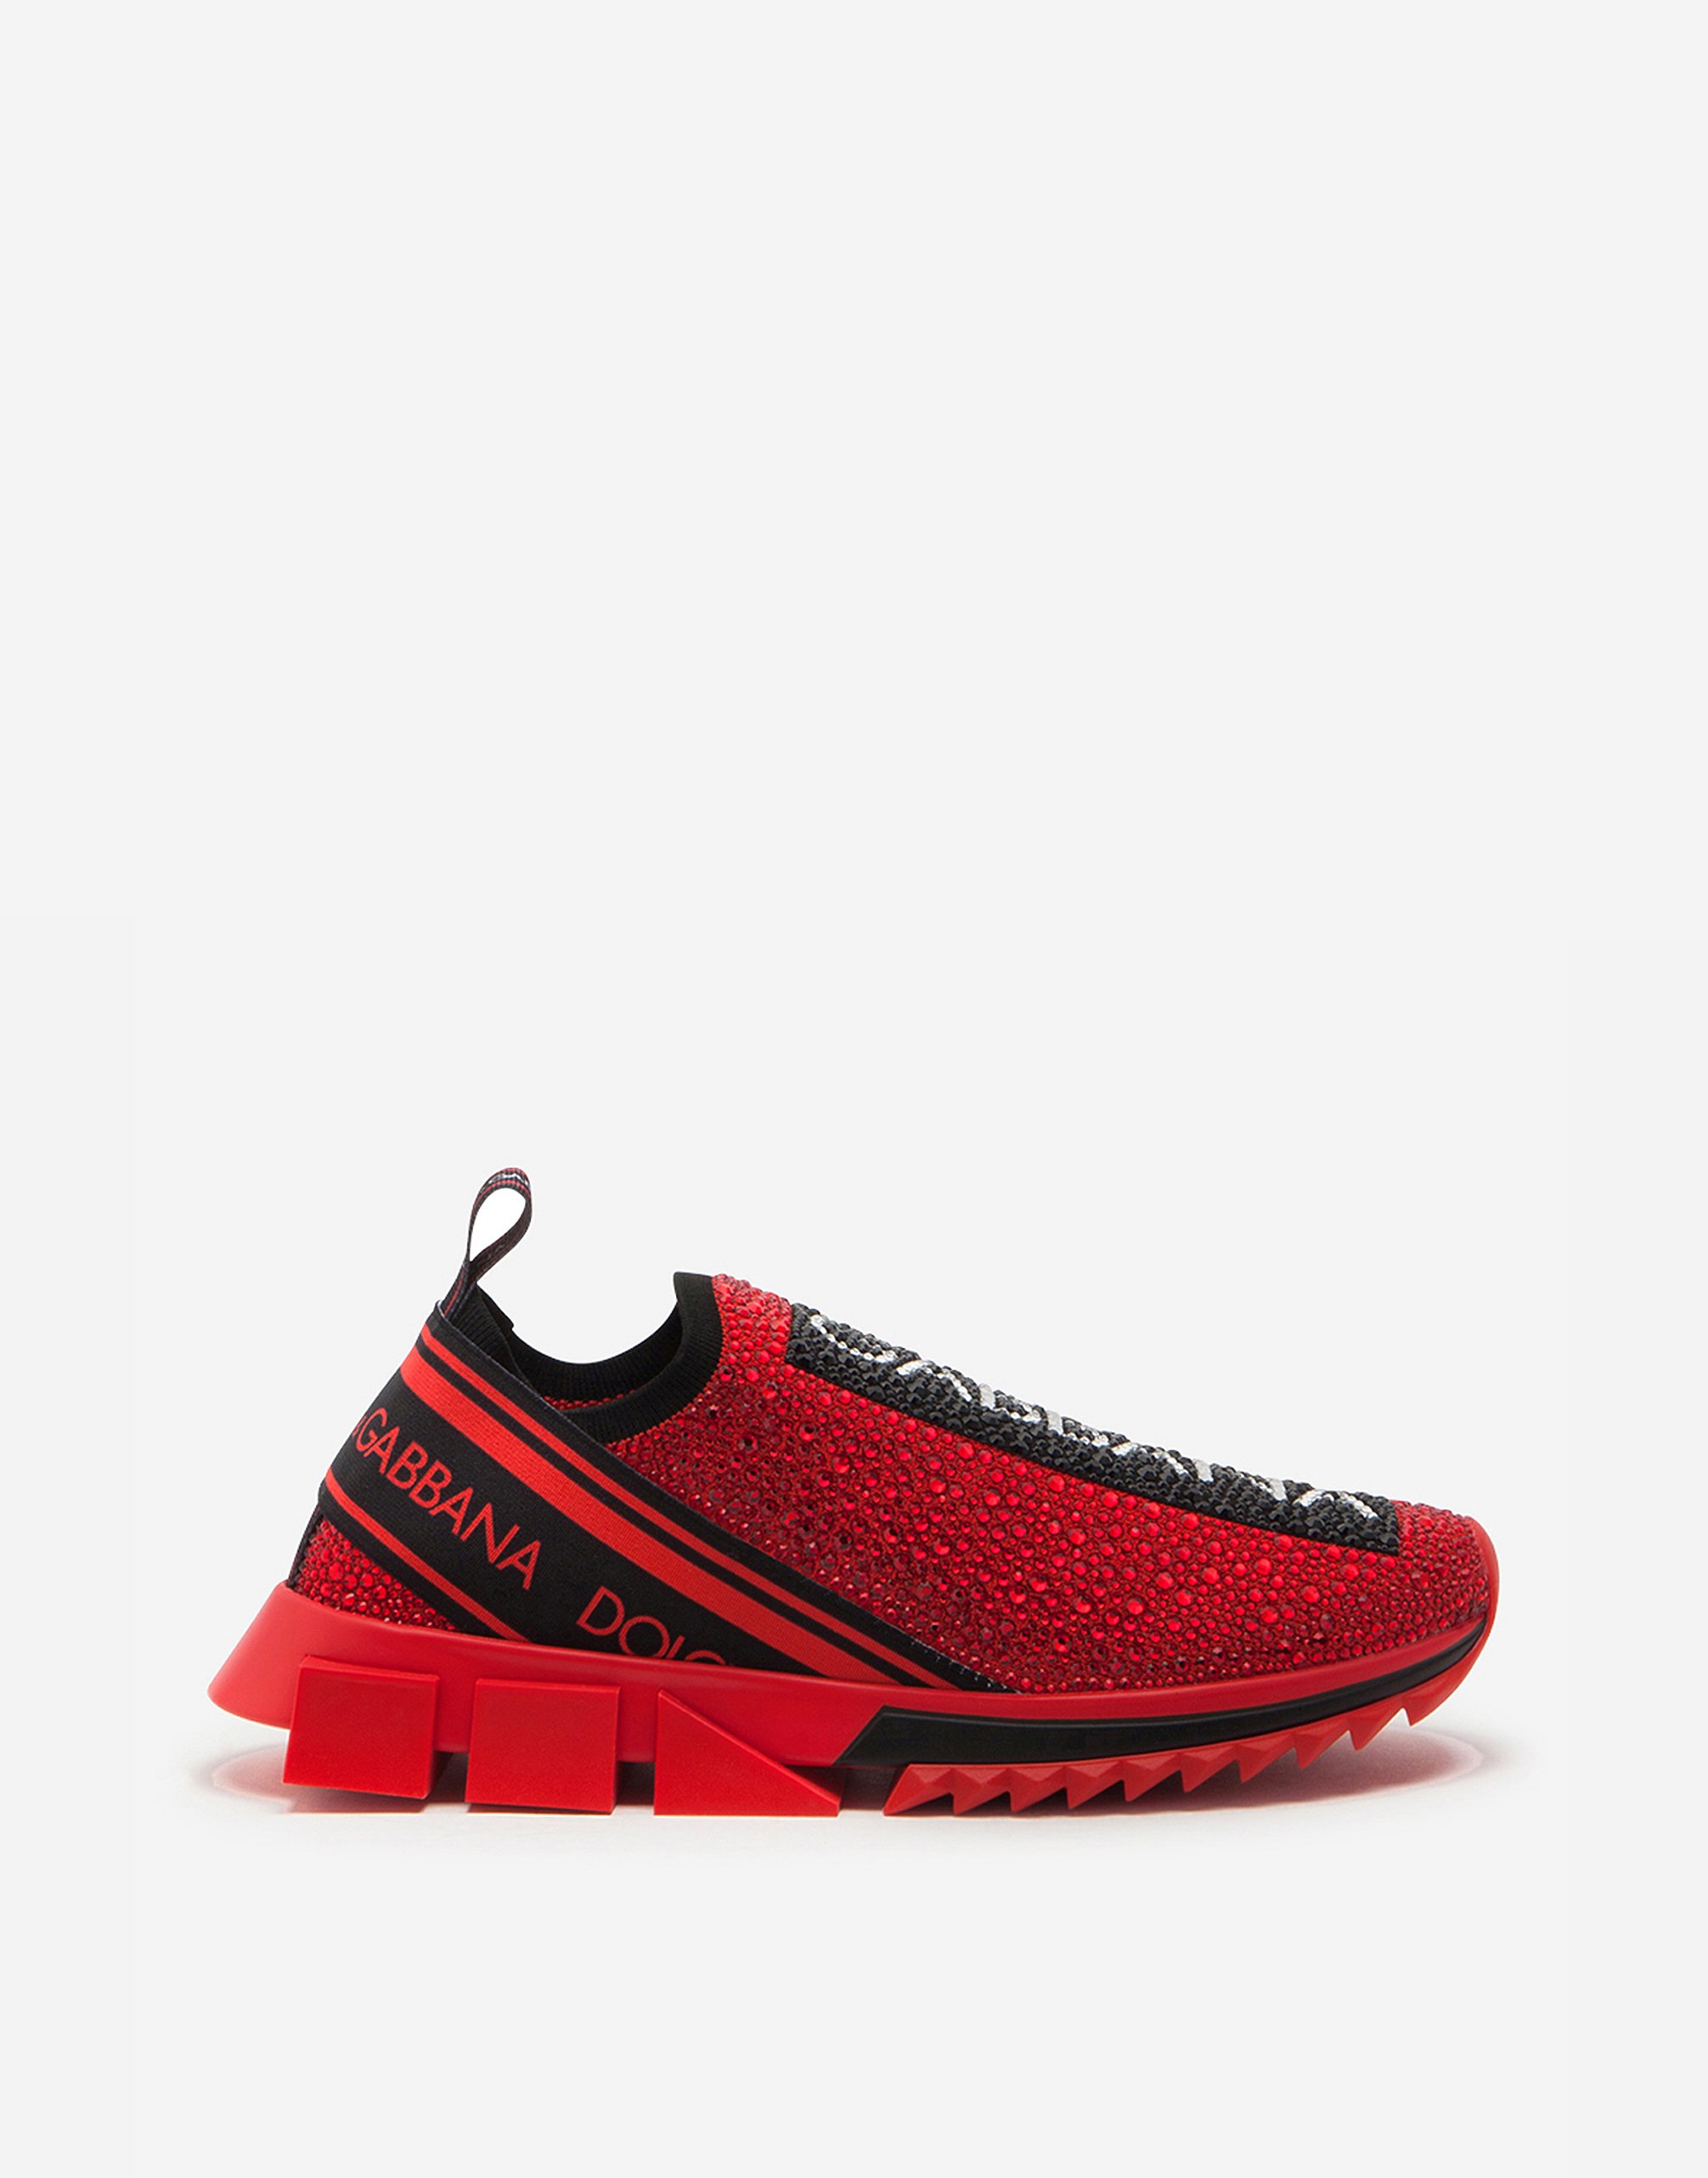 Sorrento termostrass sneakers in Red